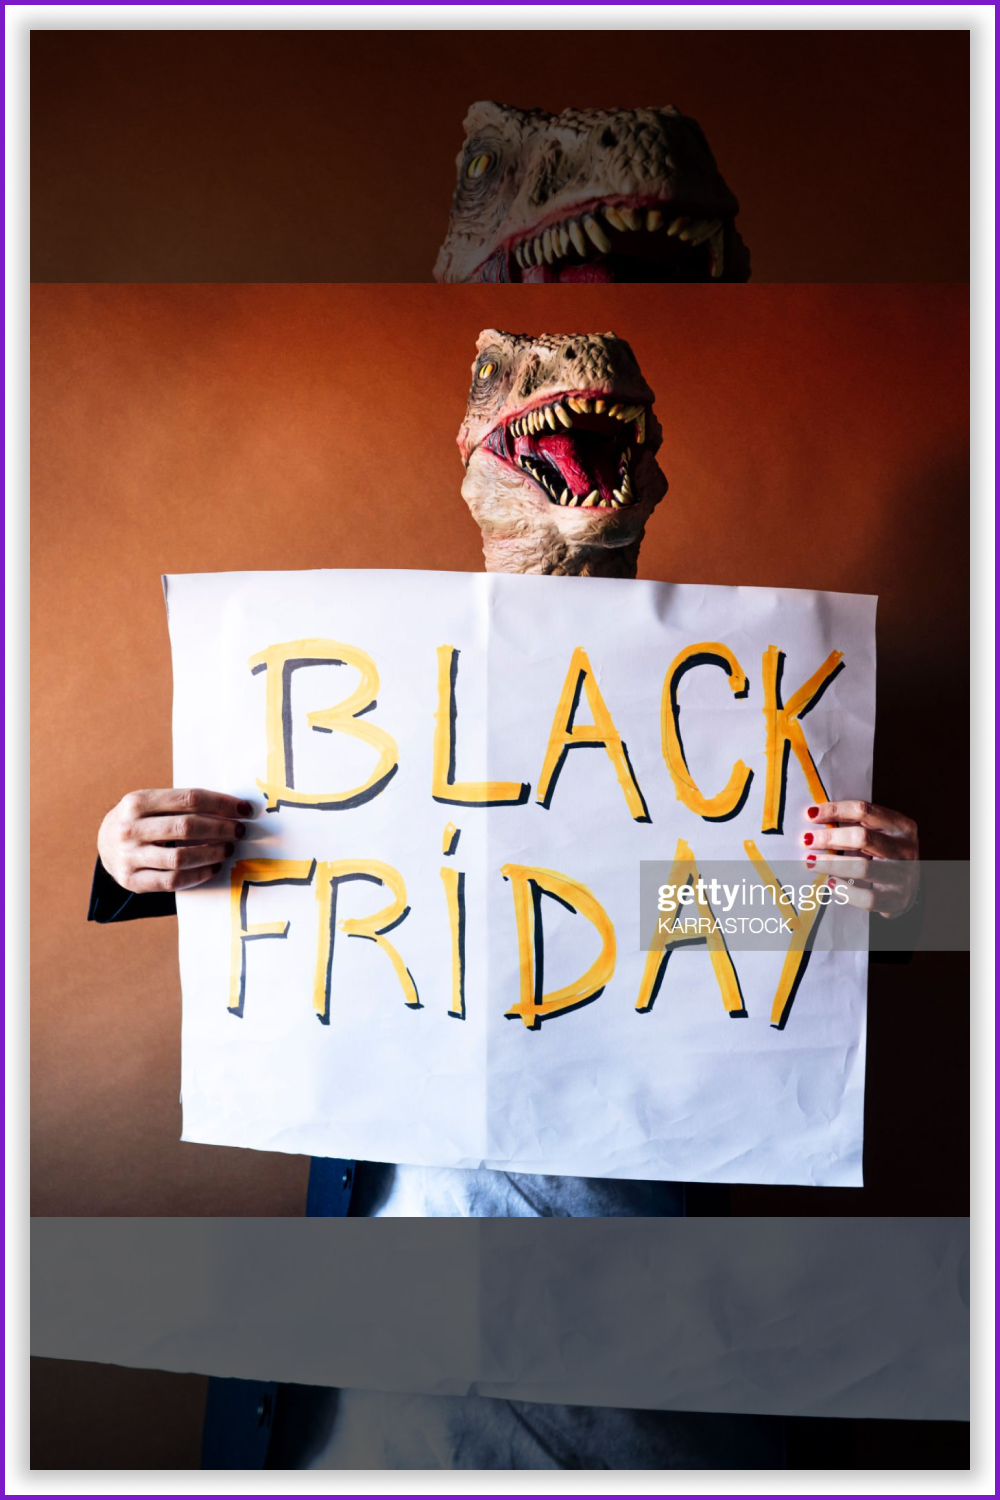 Man in lizard mask with sign Black friday in his hands.